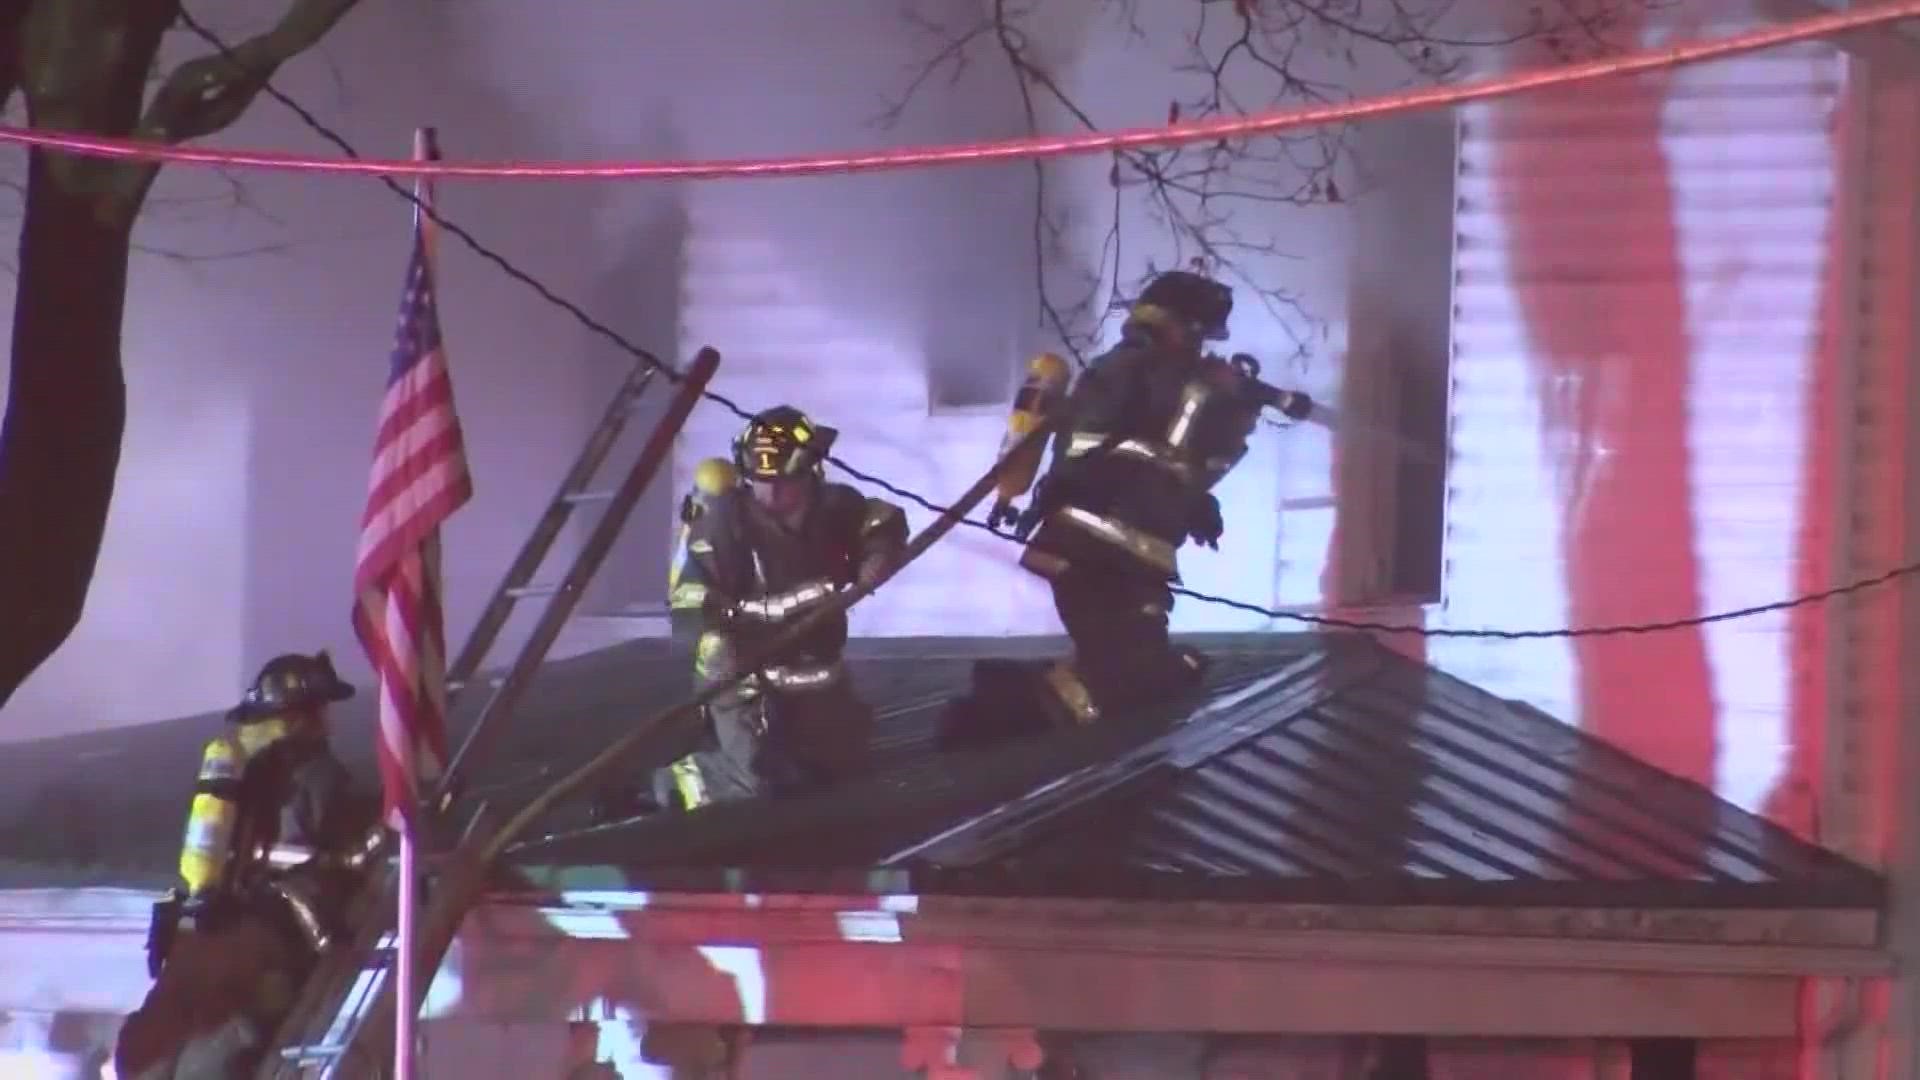 They became trapped inside while battling the blaze and a mayday call was activated.